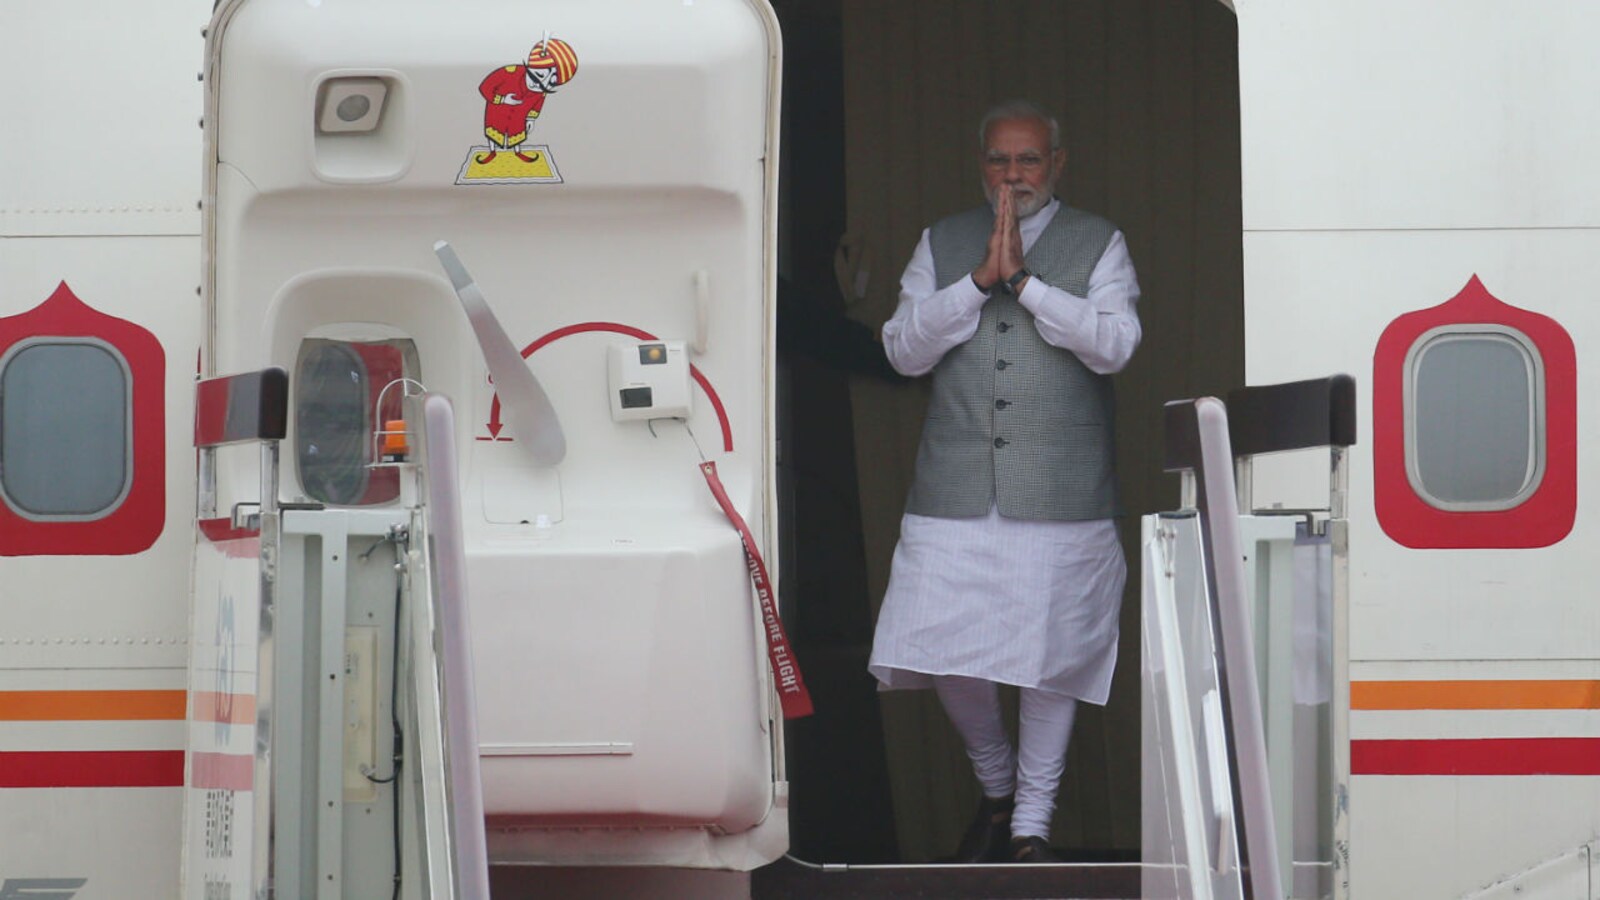 Prime Minister Narendra Modi's aircraft is basically a flying